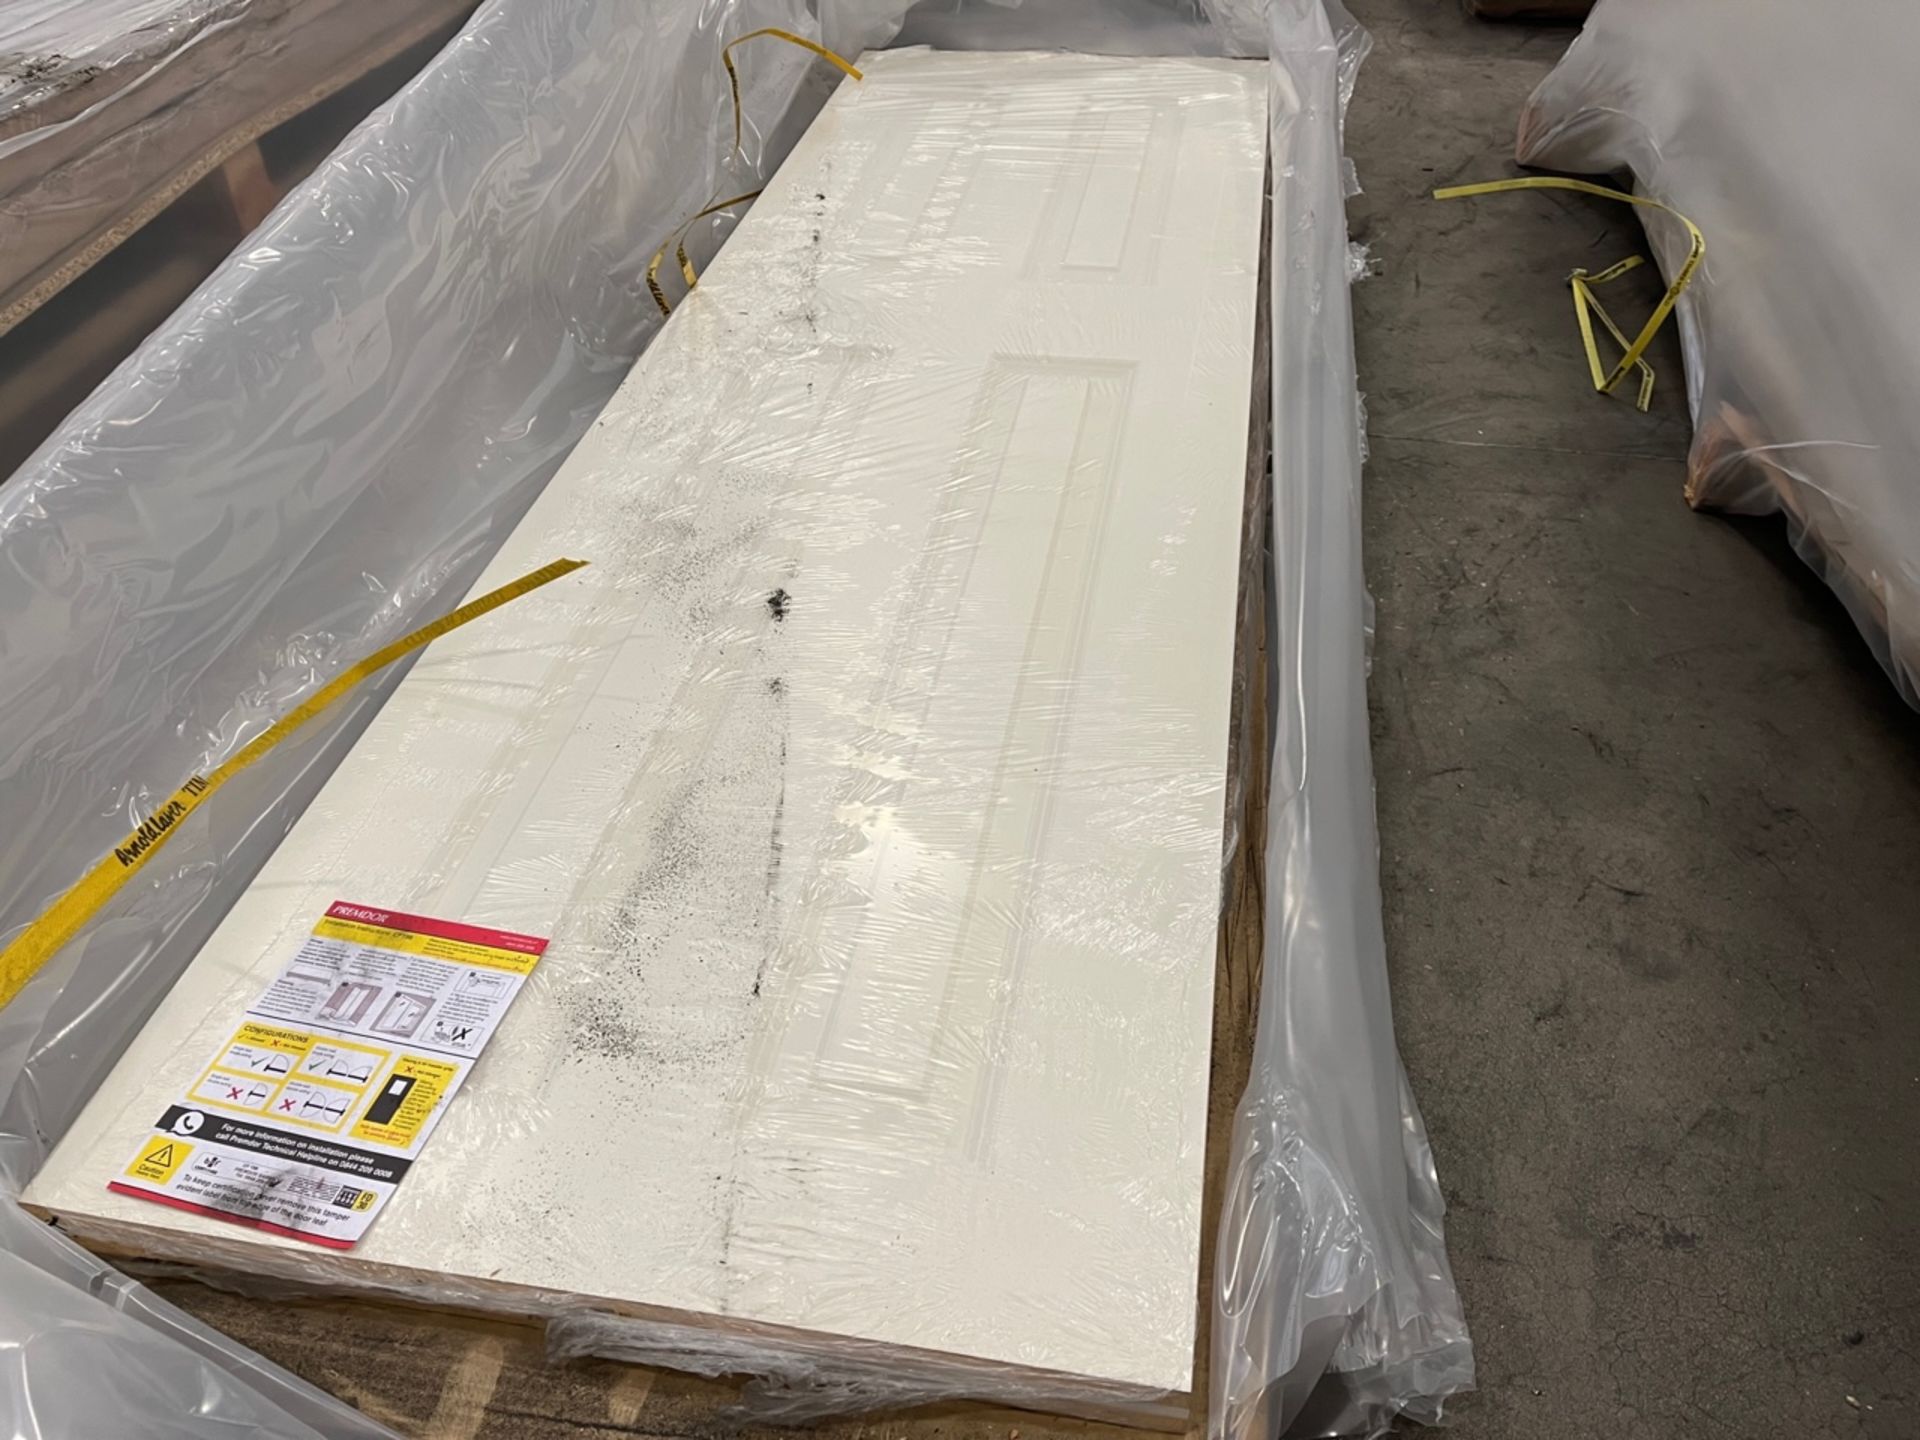 PALLET TO CONTAIN 2 X BRAND NEW PREMDOR OFF WHITE 4 PANEL WOODEN FIRE DOORS 78 X 24 X 1.7 INCHES - Image 2 of 2